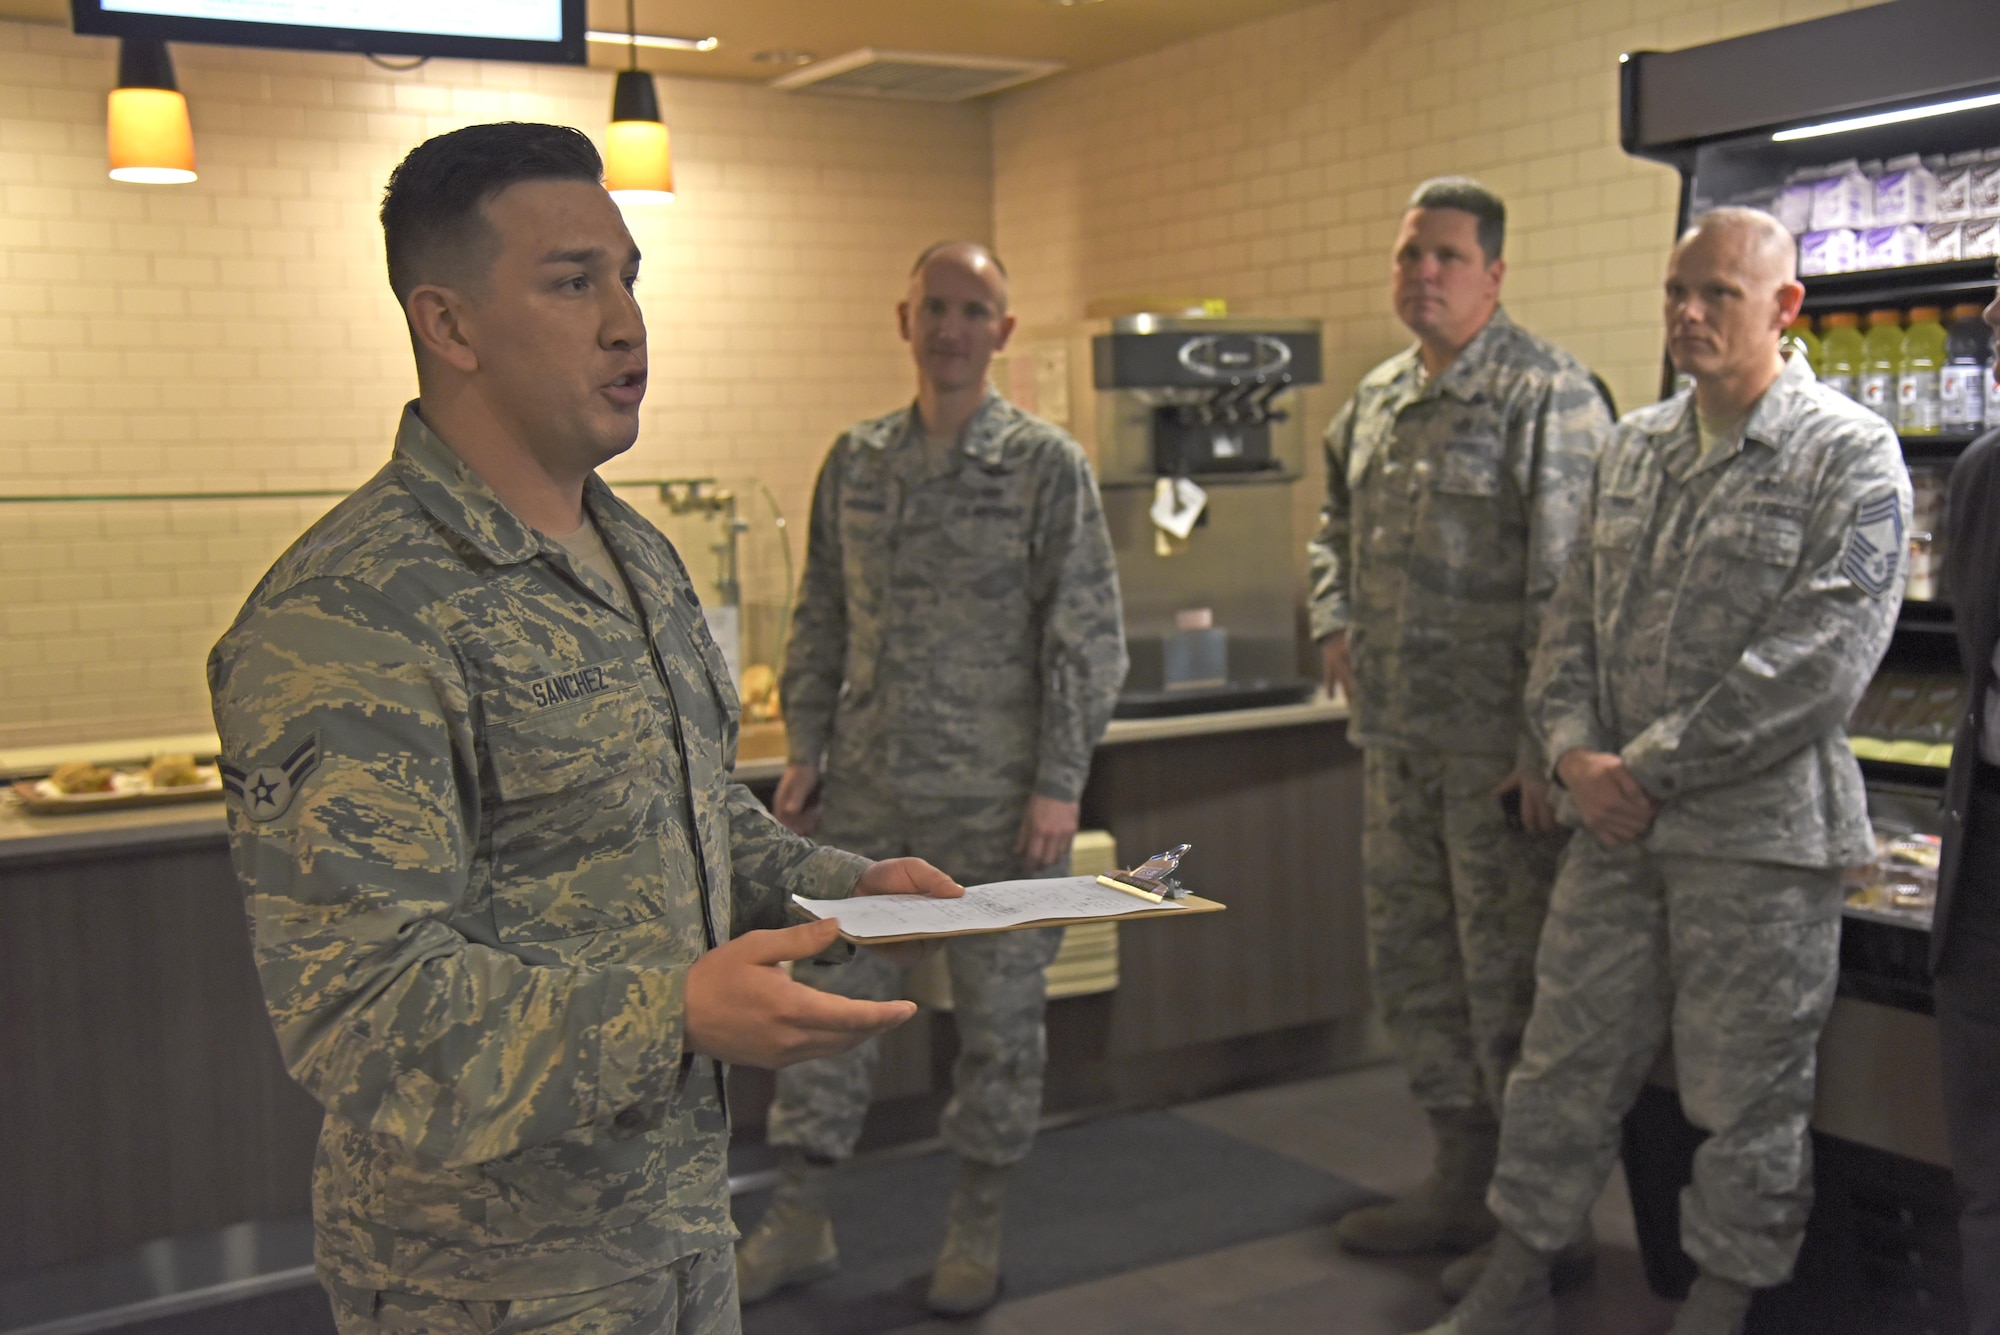 Airman 1st Class Eric Sanchez, 92nd Force Support Squadron services journeyman, talks with base leadership about the healthier, made-to-order Super Sonic Subs Mar. 27, 2017, at Fairchild Air Force Base, Washington. Base leadership gathered to taste test the Warrior Mission Essential Feeding Facility's new concepts. (U.S. Air Force photo/Senior Airman Mackenzie Richardson)